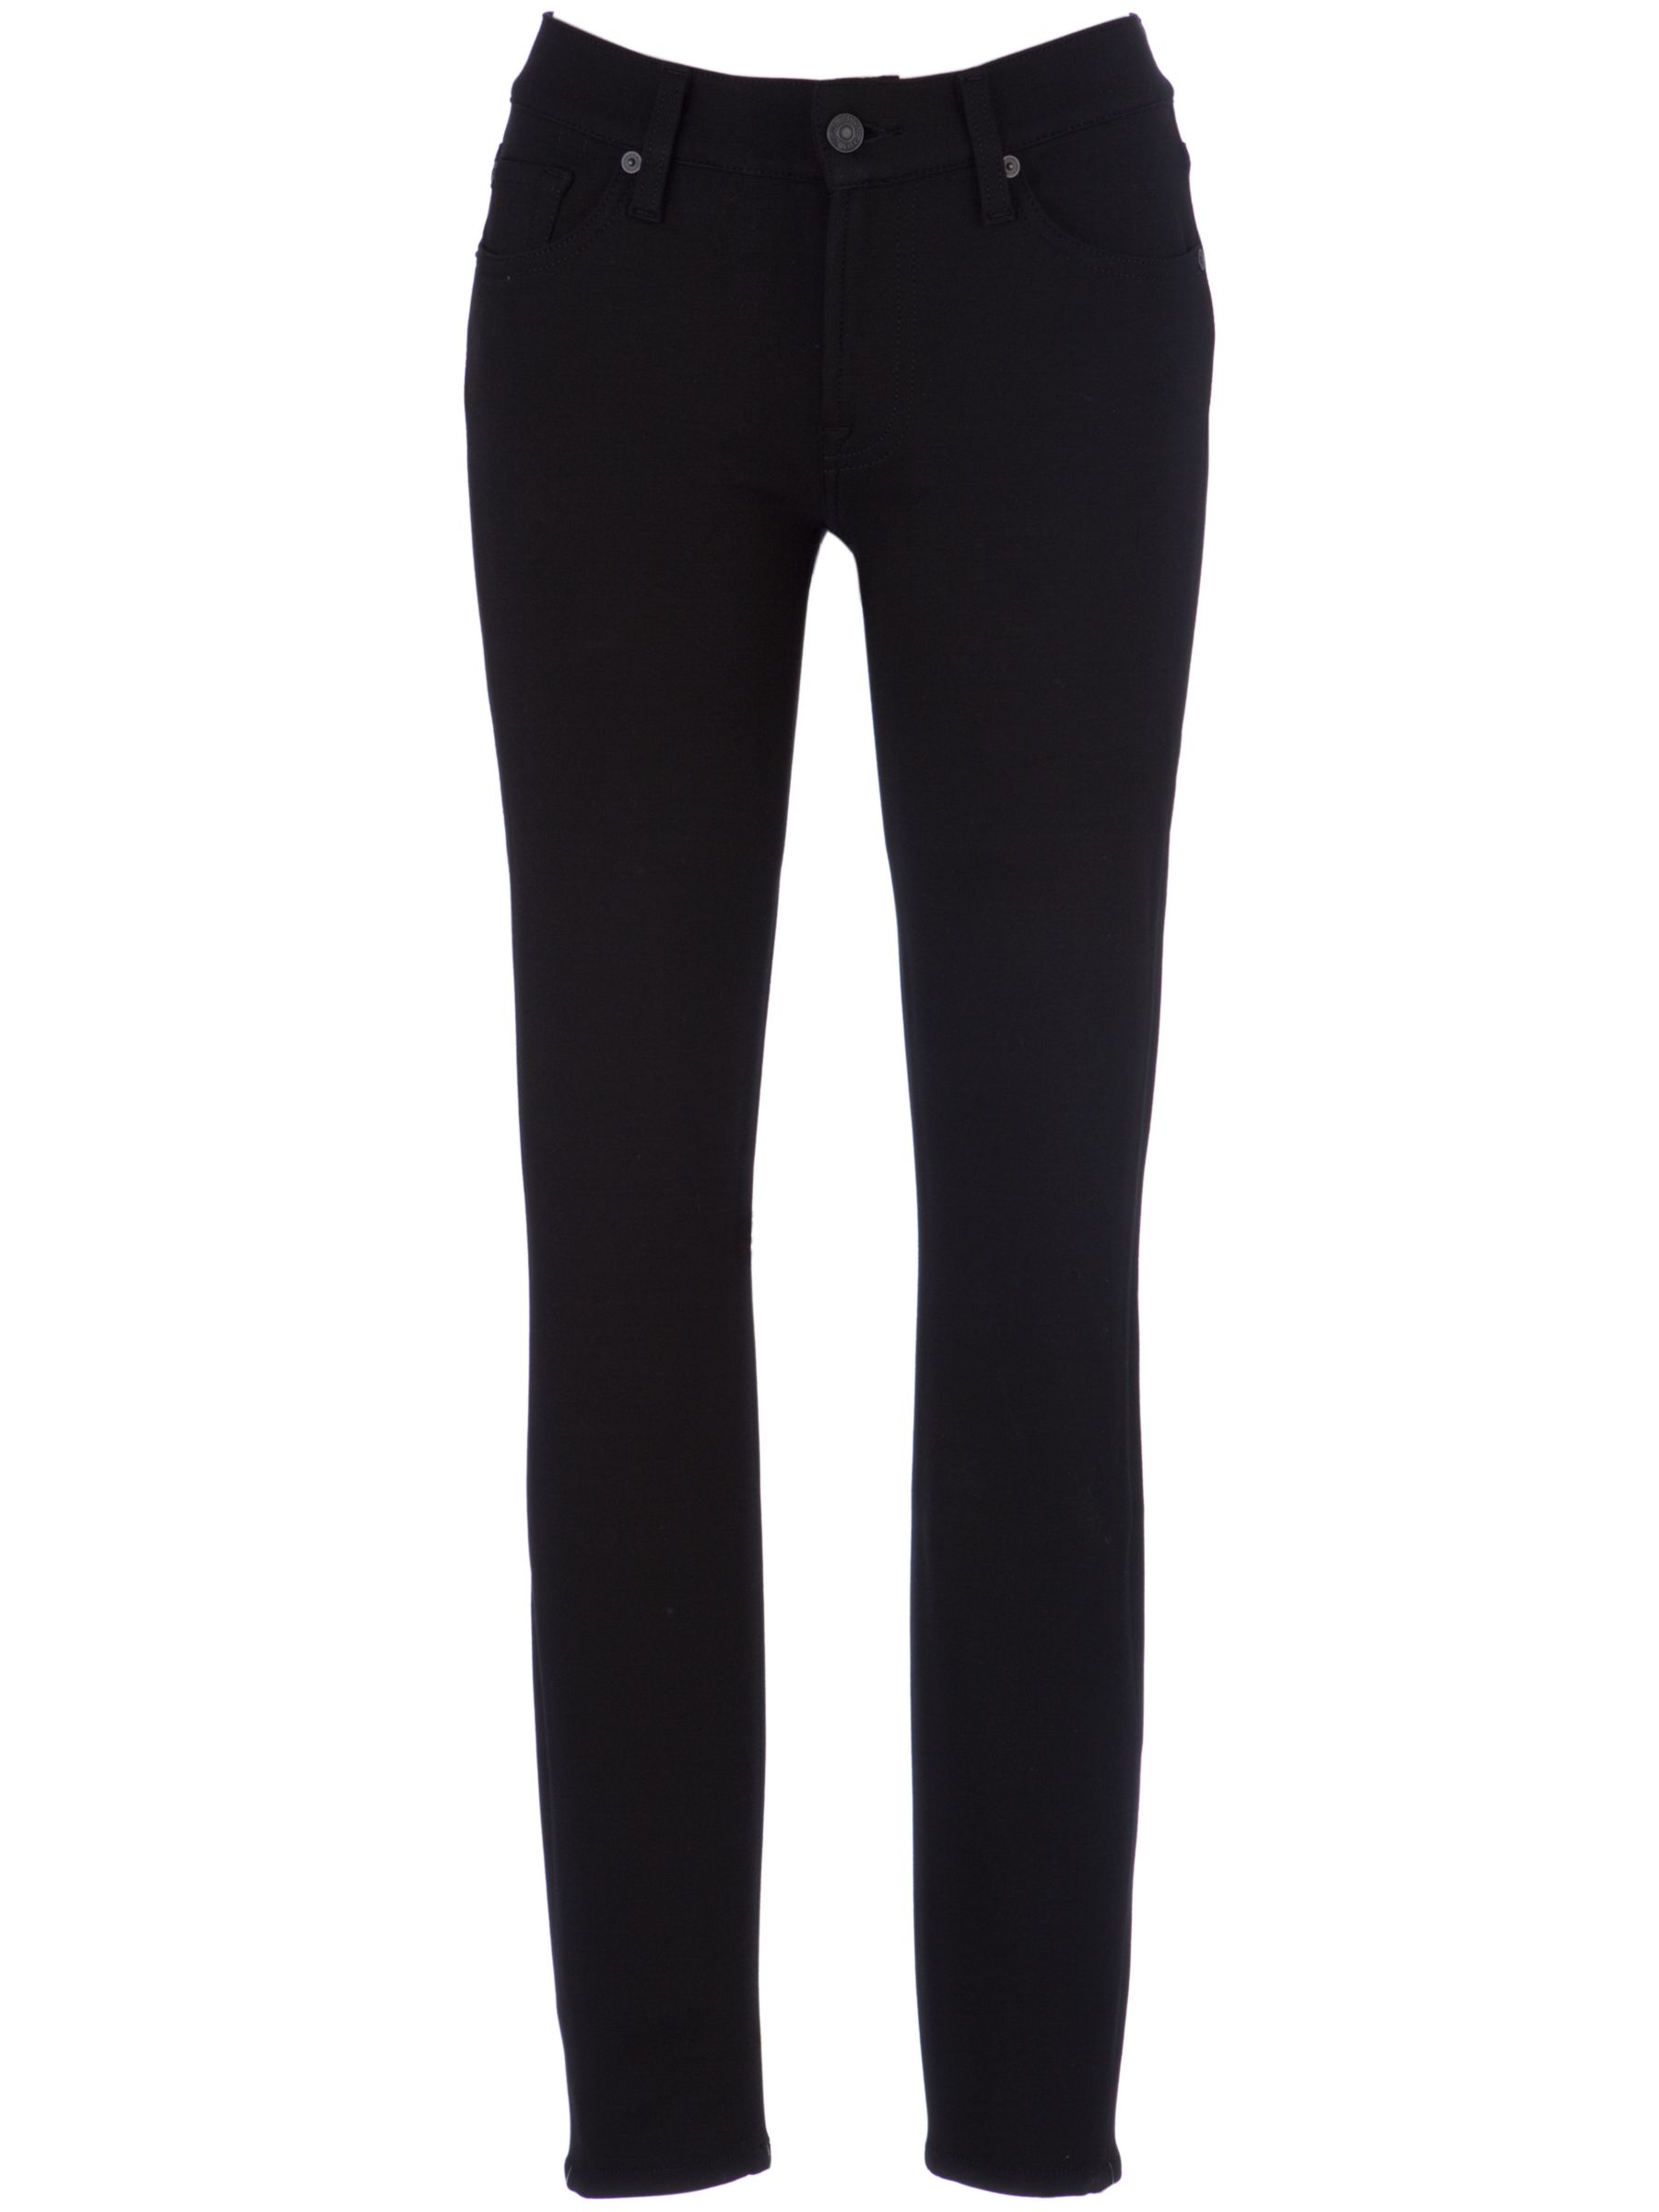 7 For All Mankind Gwenevere Double Knit Jegging, Black at John Lewis